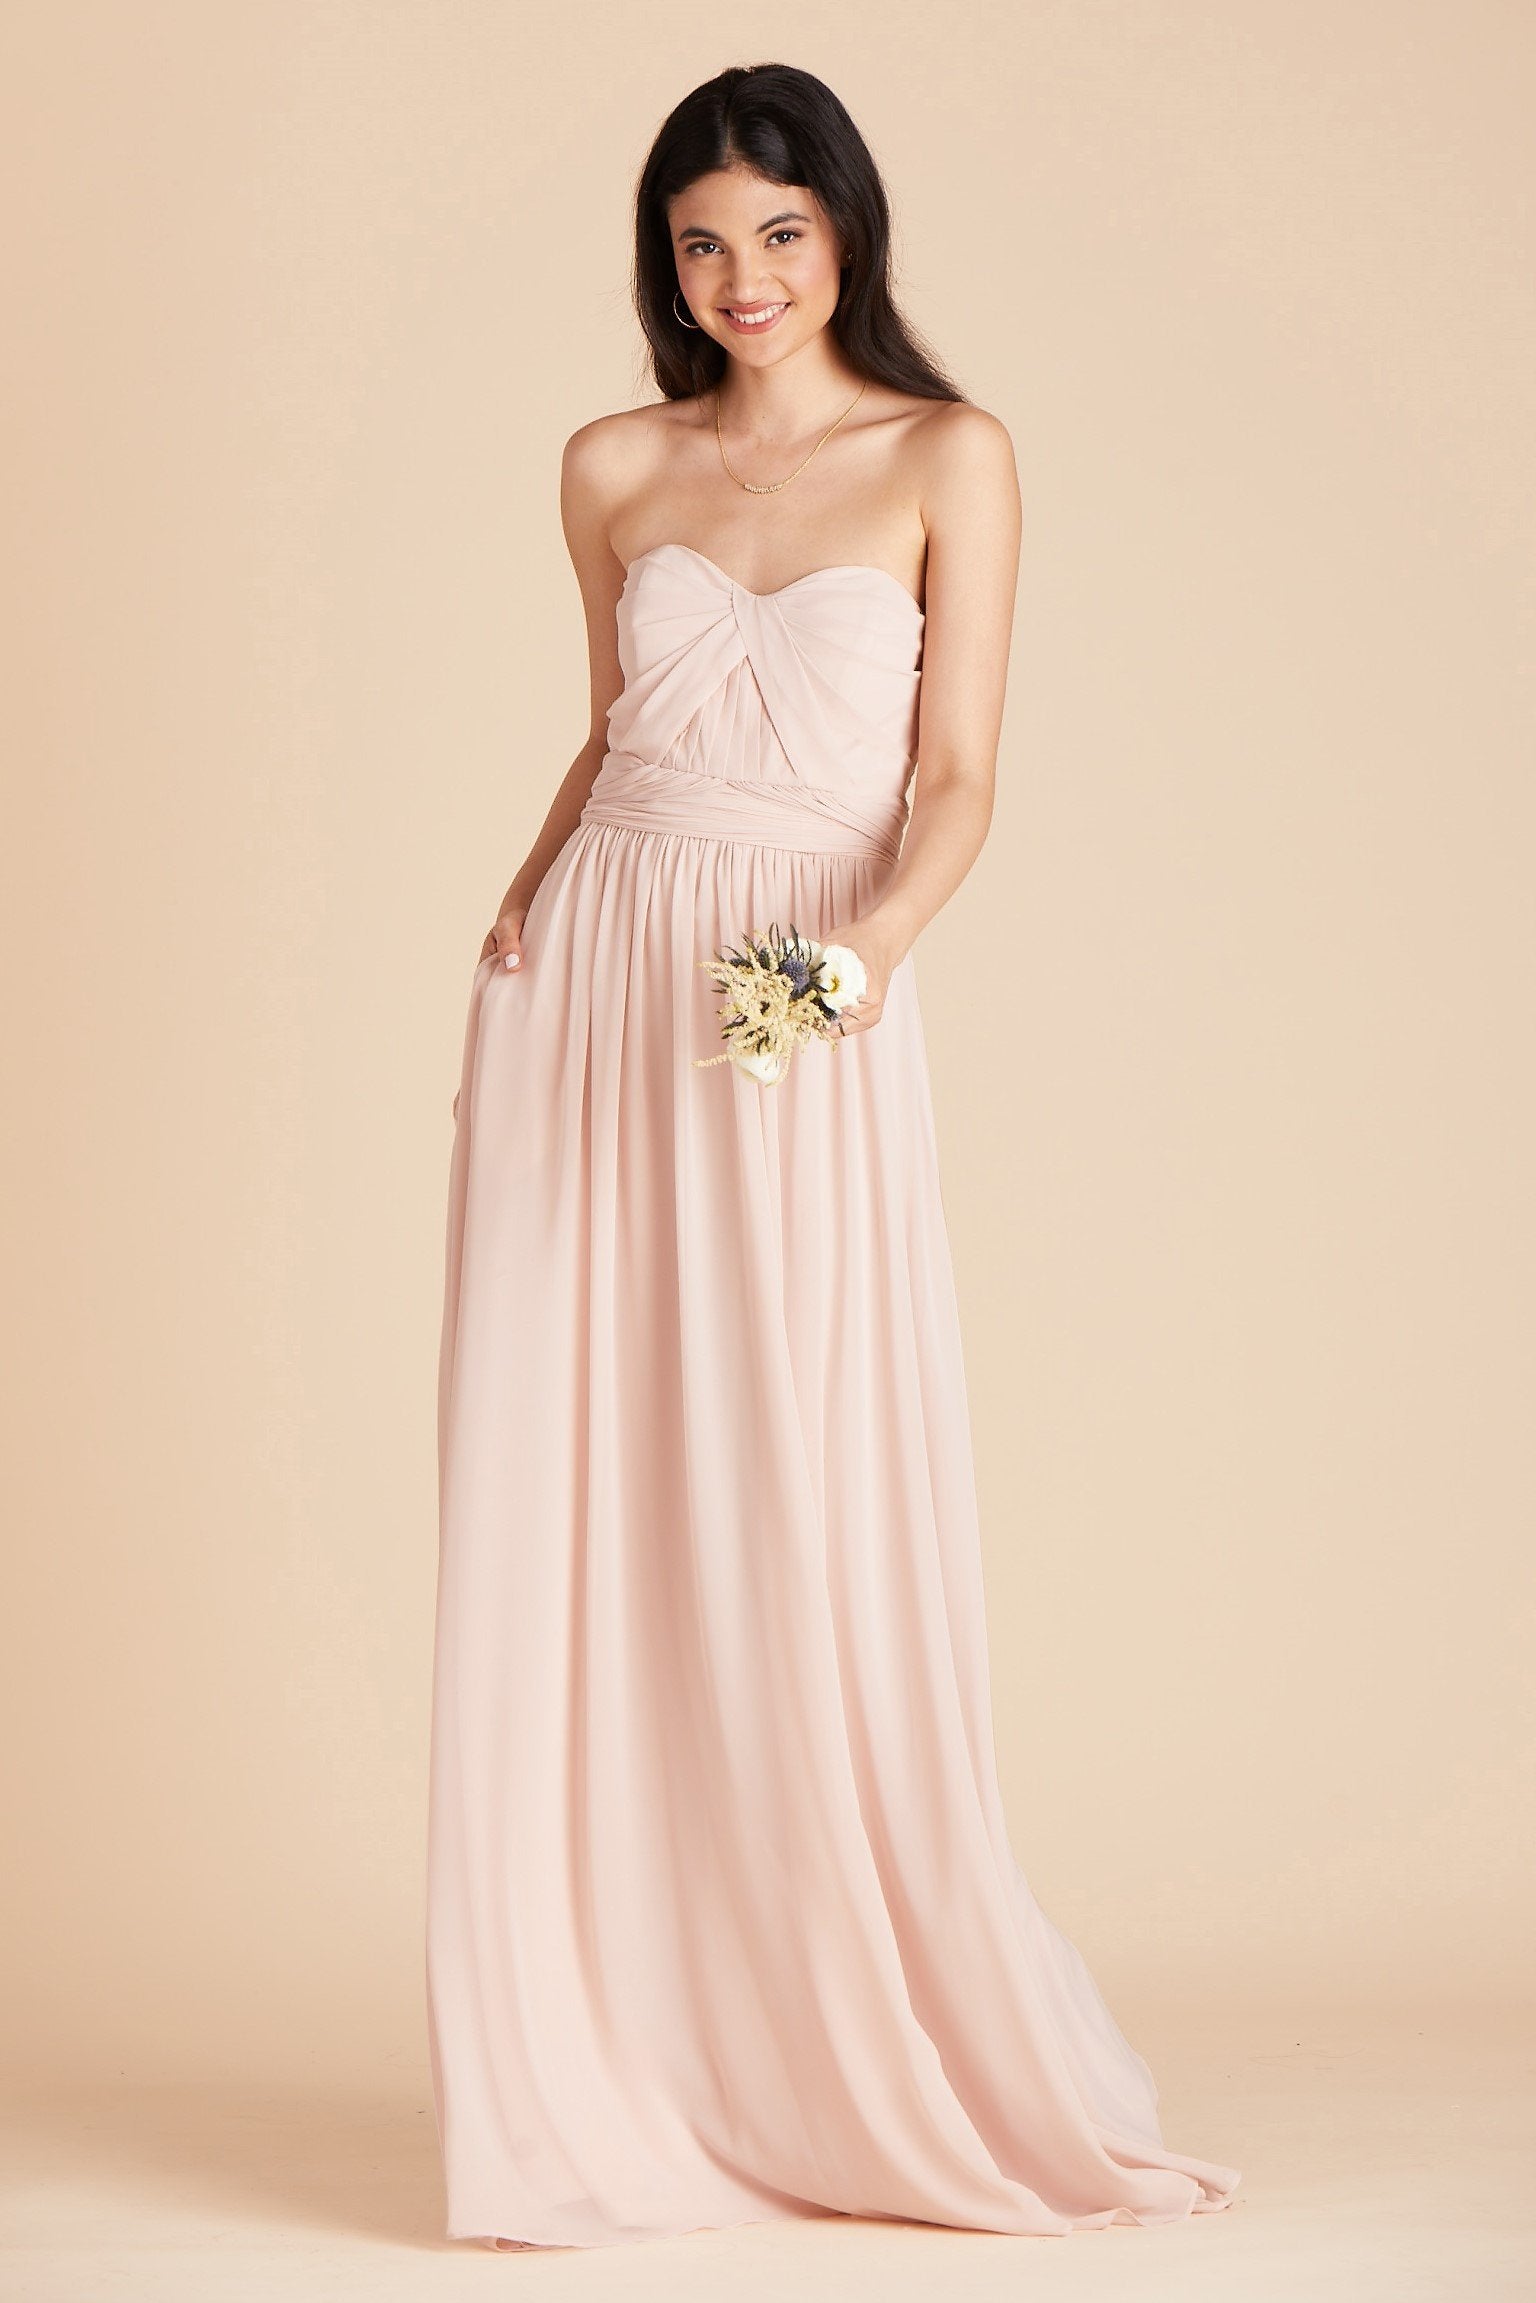 Grace convertible bridesmaid dress in pale blush pink chiffon by Birdy Grey, front view with hand in pocket